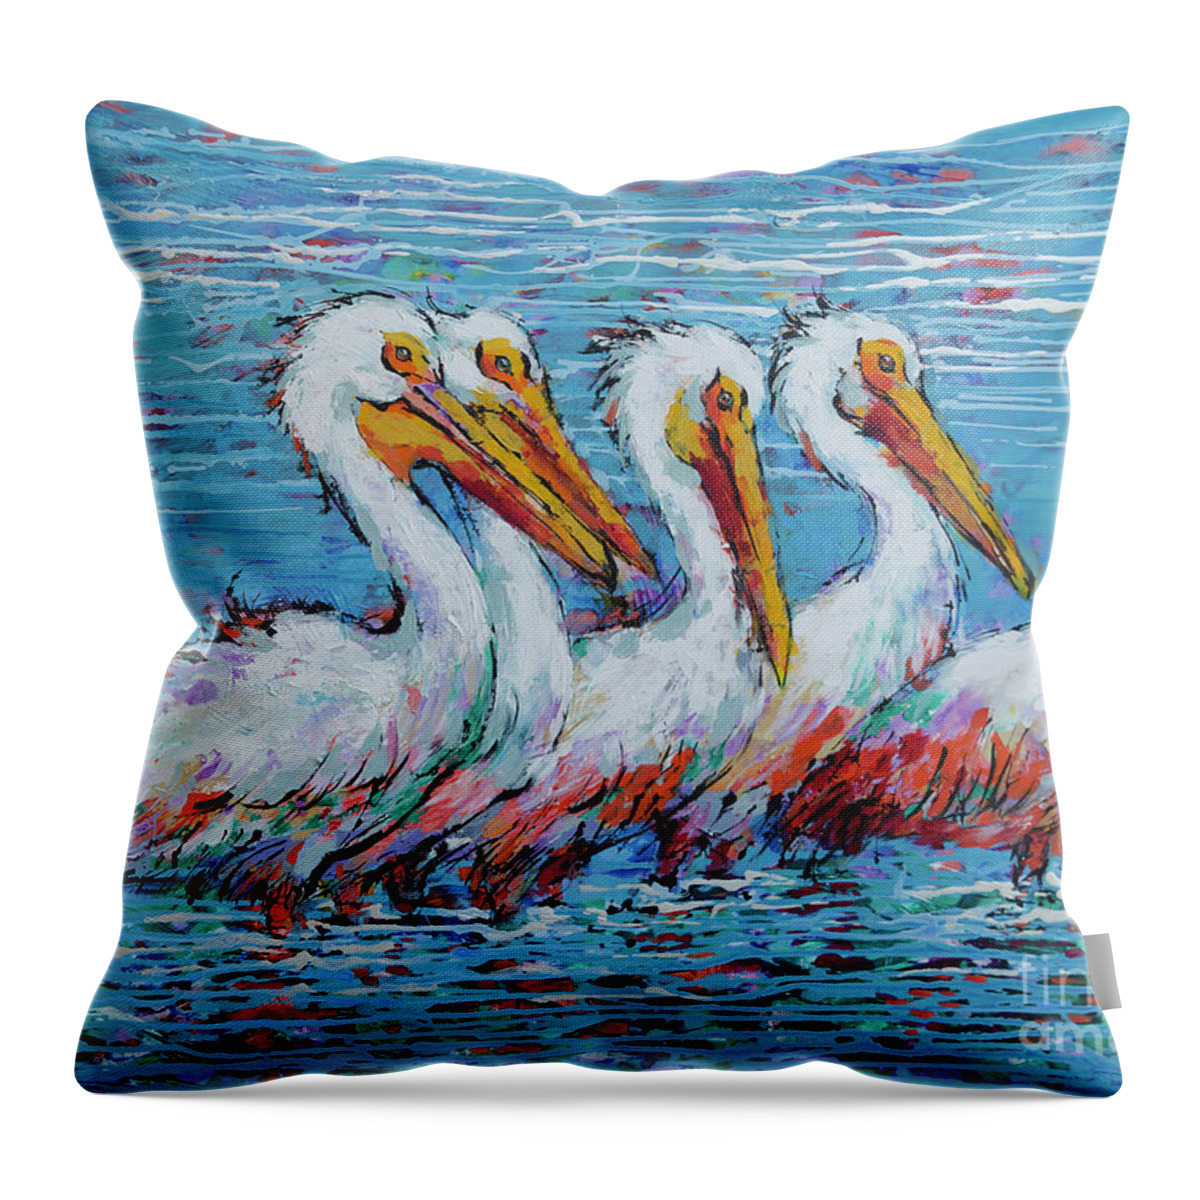  Throw Pillow featuring the painting Flock Of White Pelicans by Jyotika Shroff